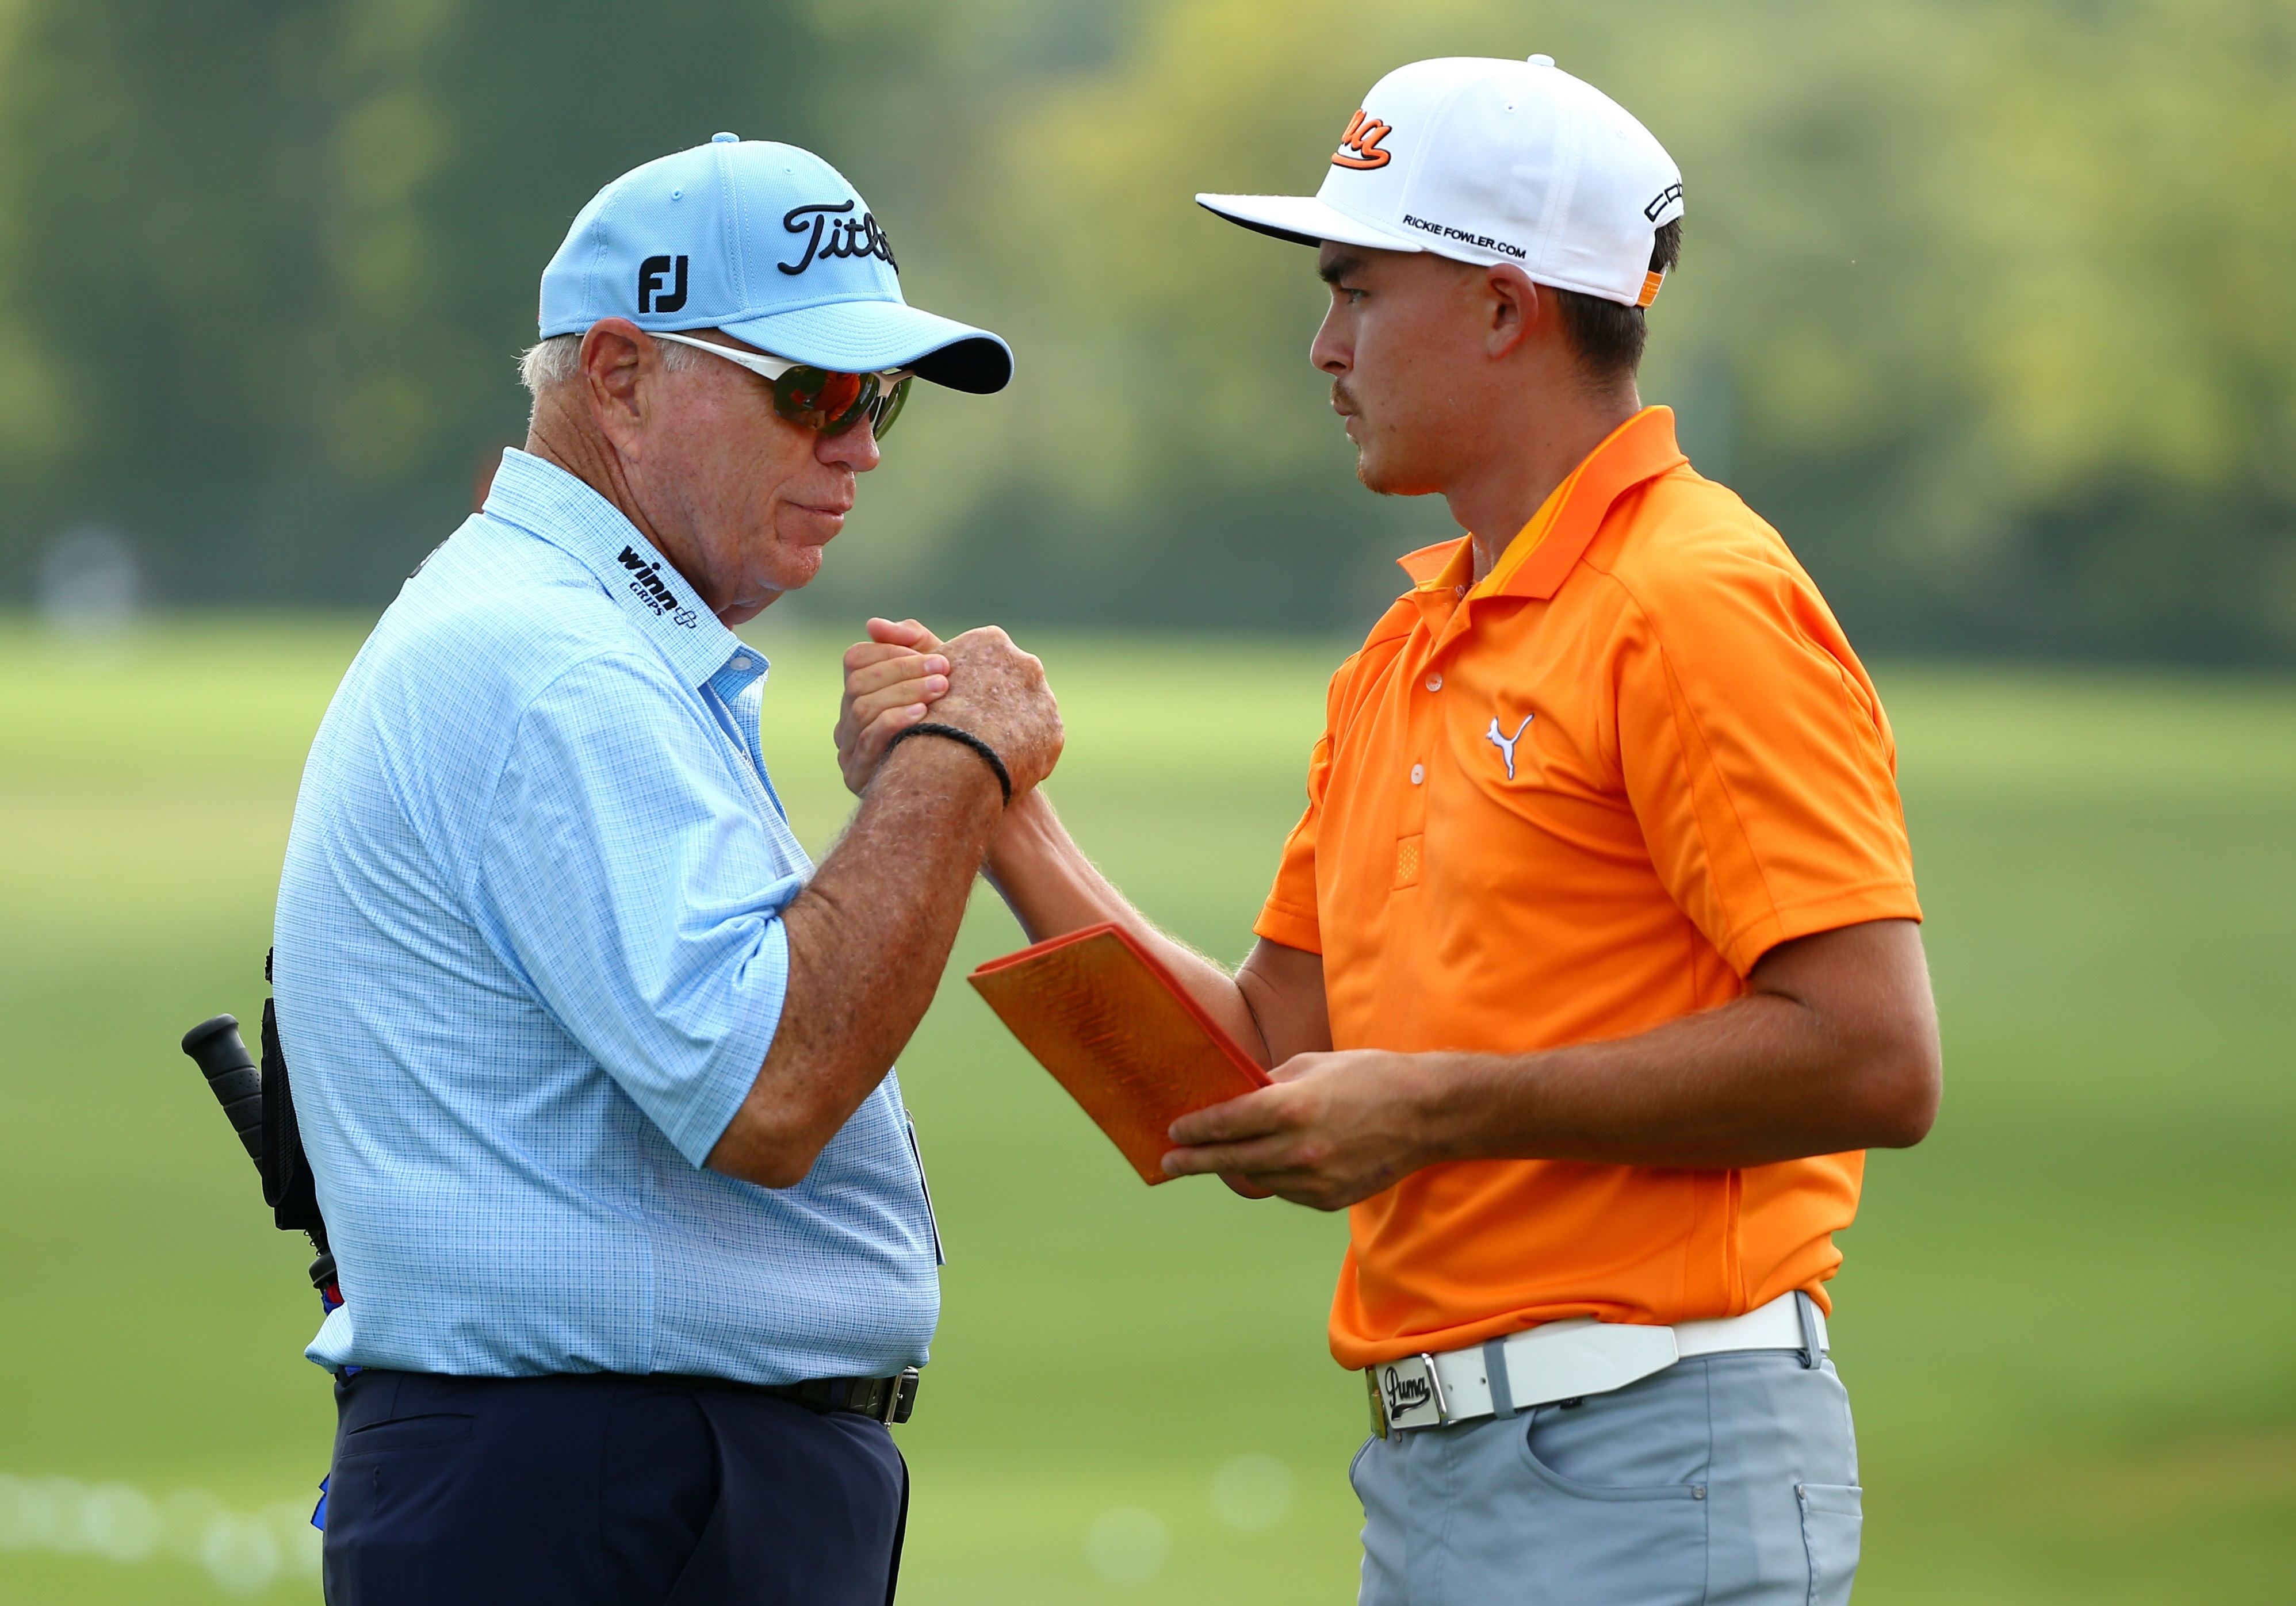 Olsavsky loves the chemistry between Fowler and his swing coach Butch Harmon 